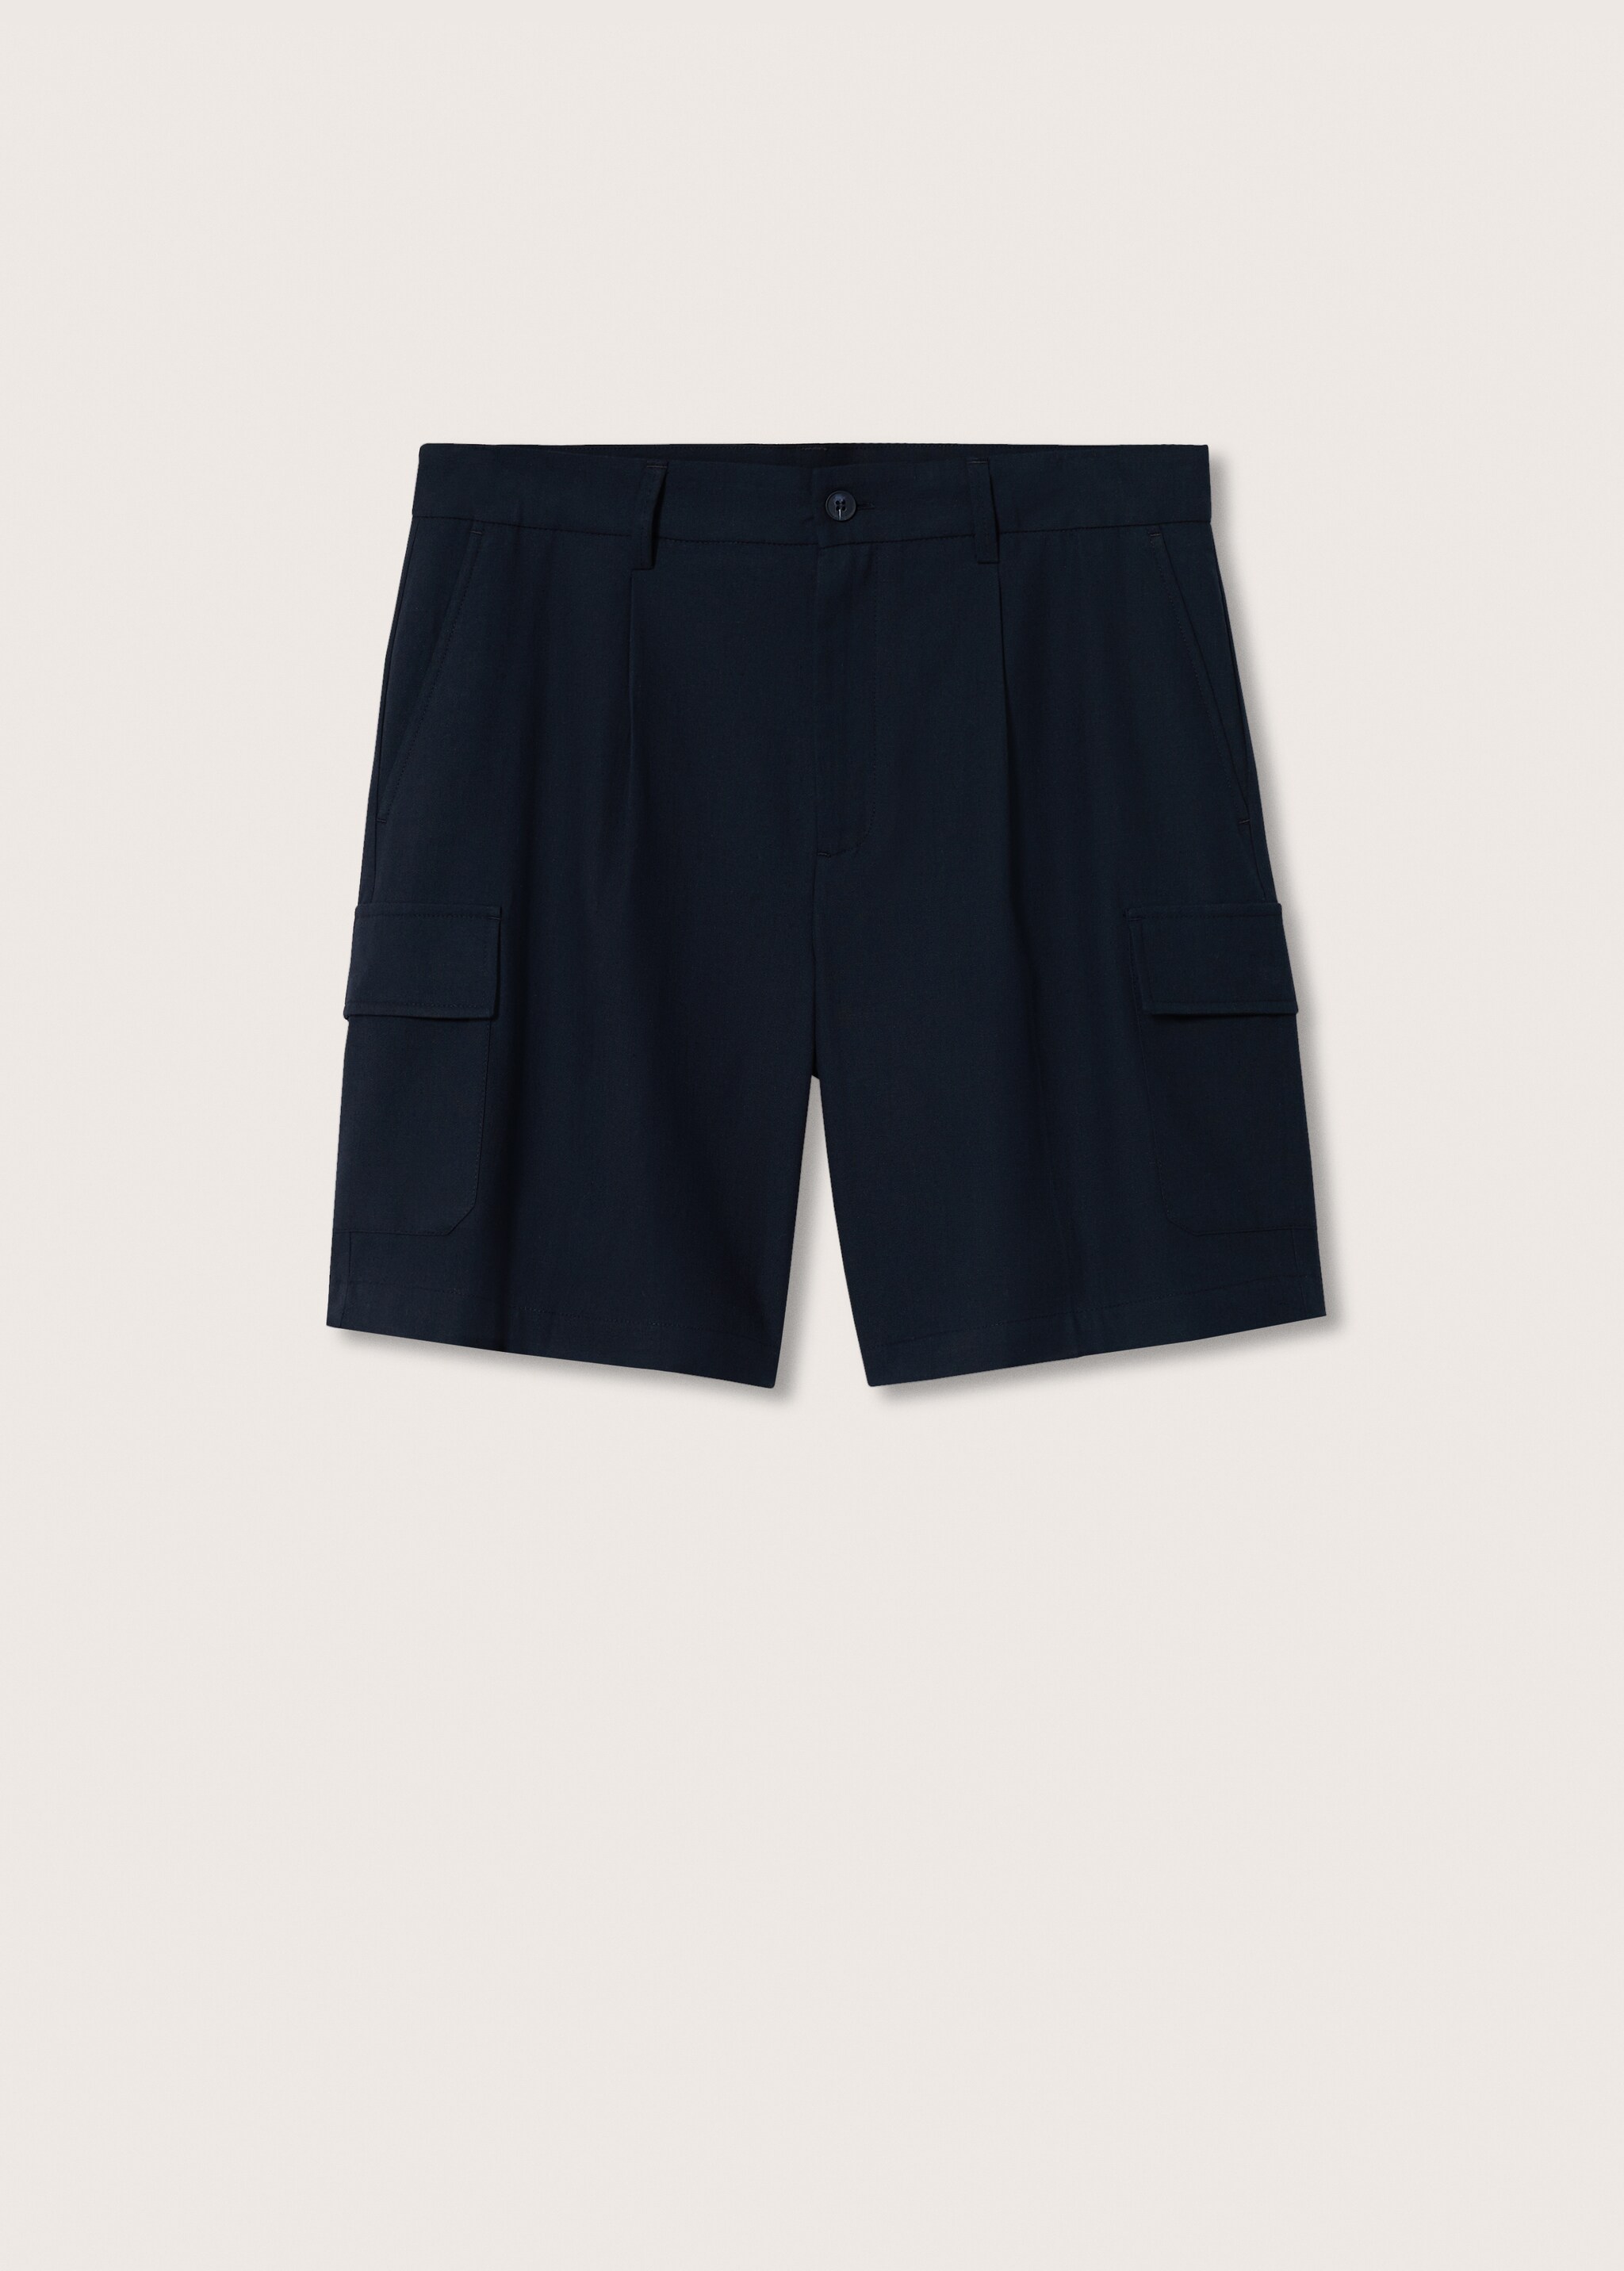 Cotton linen cargo shorts - Article without model